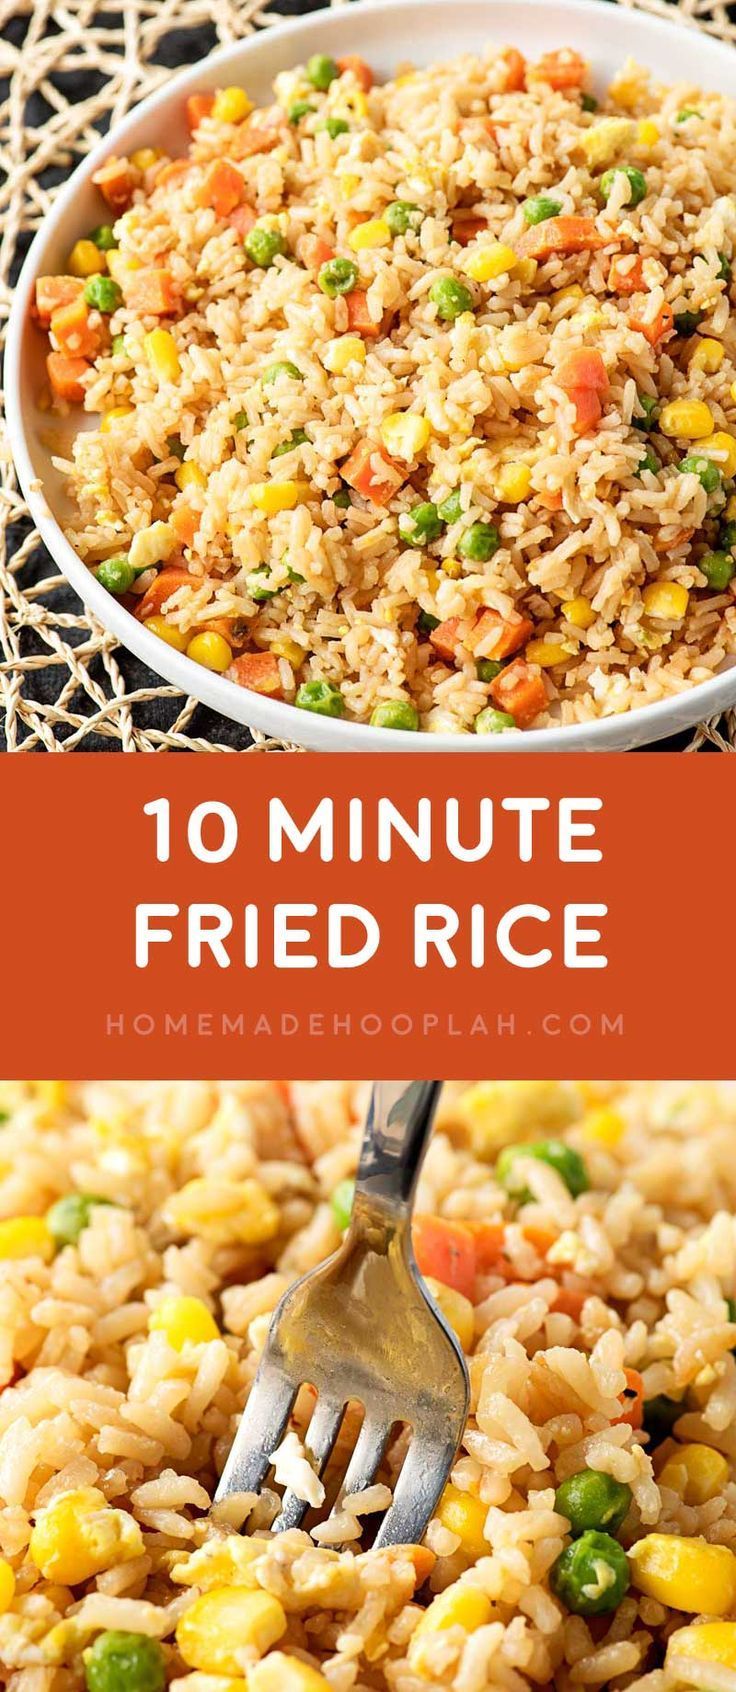 10 Minute Fried Rice! Need a new go-to side dish for busy weeknights? Fried rice is always a great staple, and this easy recipe makes it easy to whip up in just 10 minutes! | HomemadeHooplah.com -   20 vegetable recipes quick
 ideas